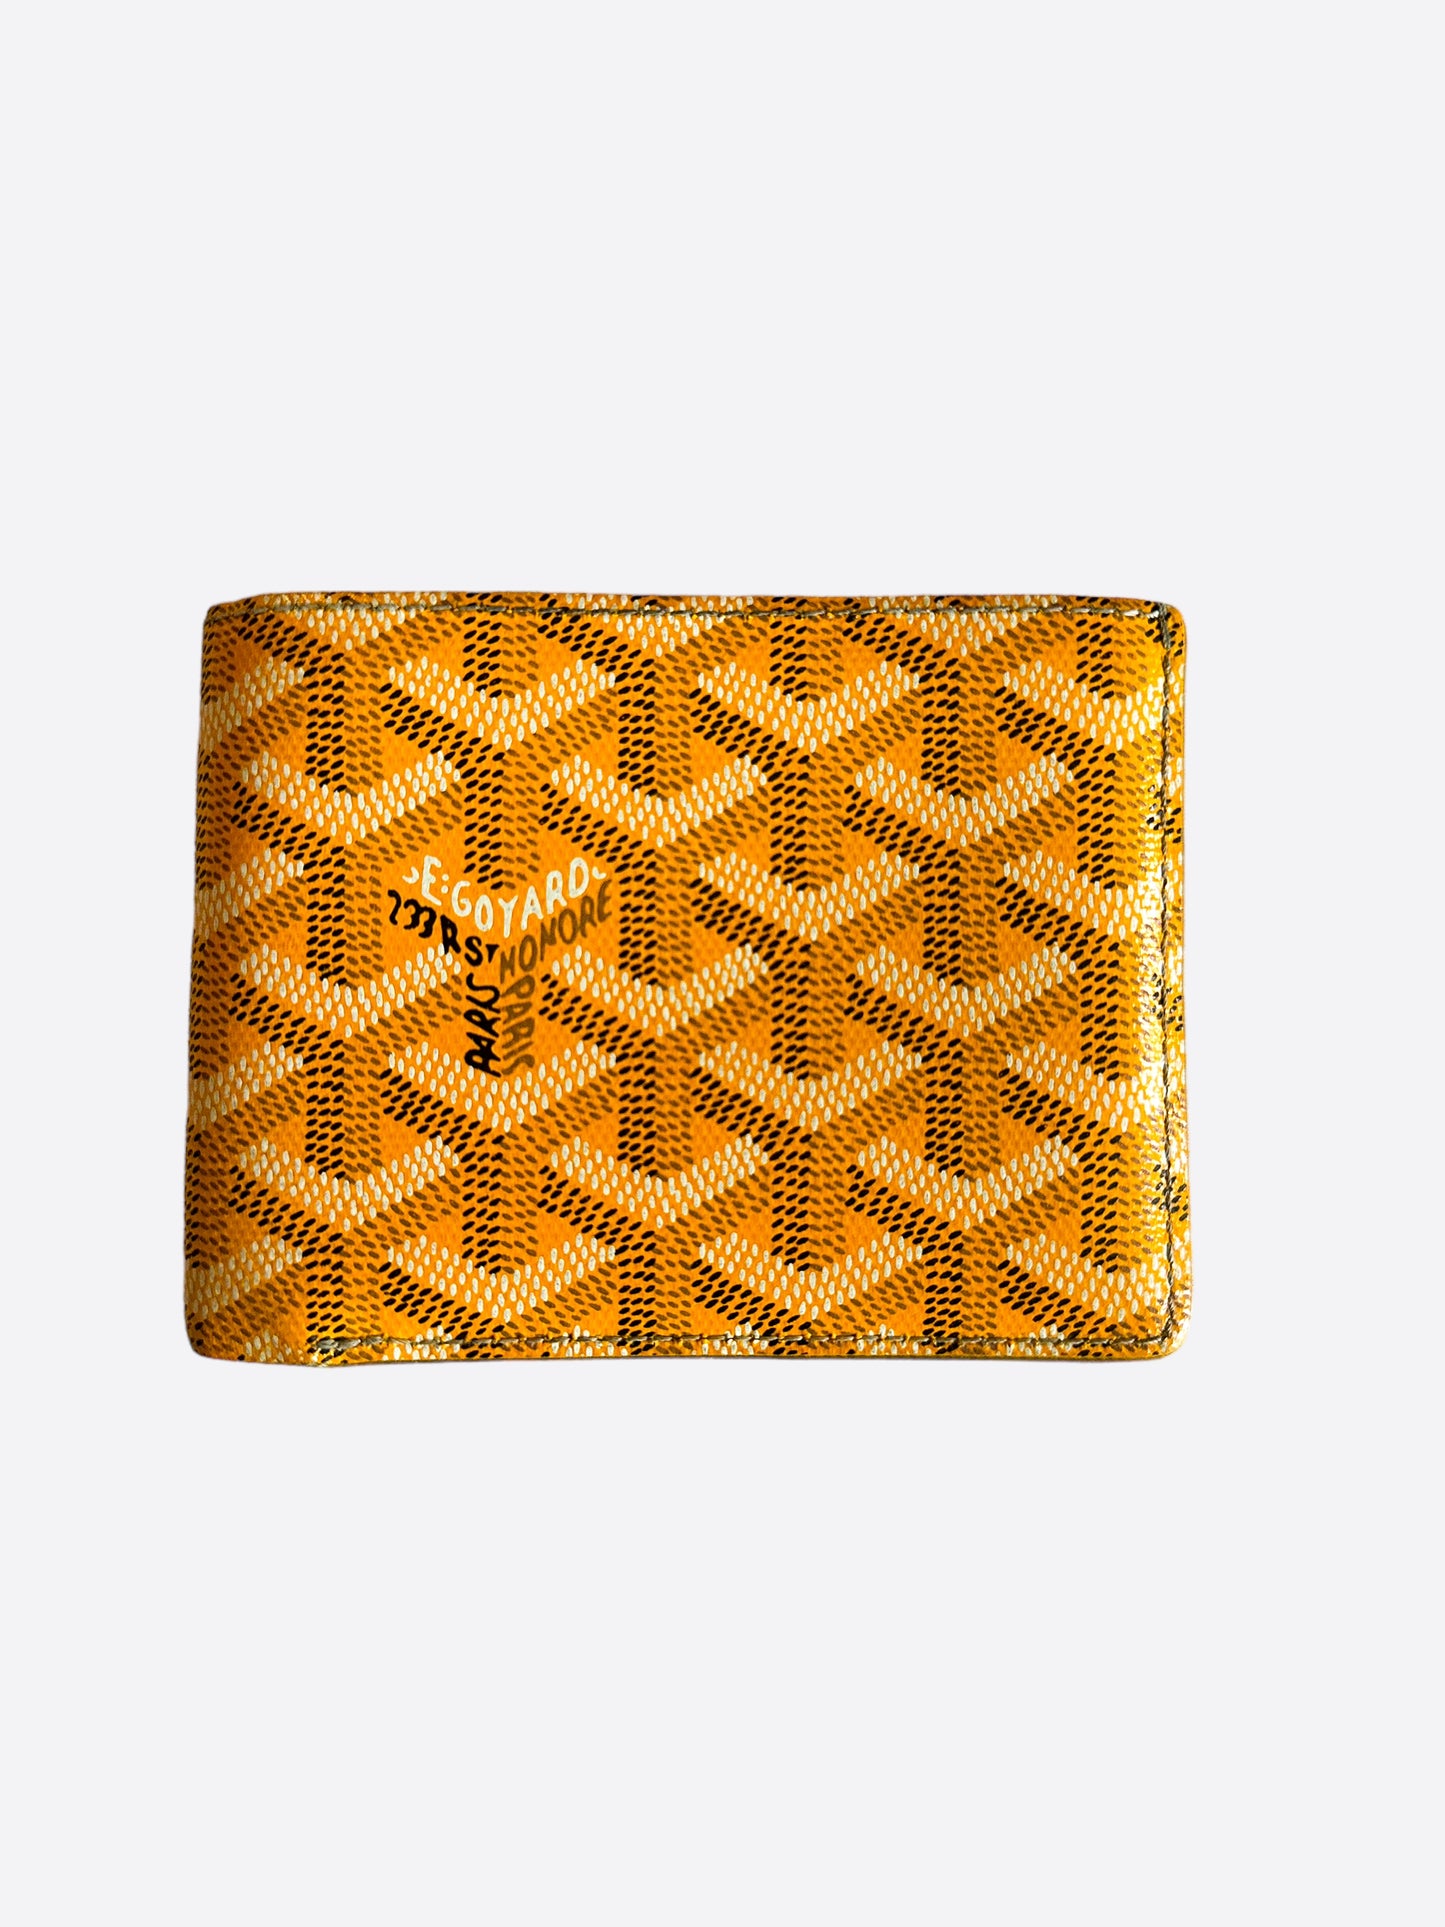 Goyard Pre-owned Women's Leather Wallet - Yellow - One Size